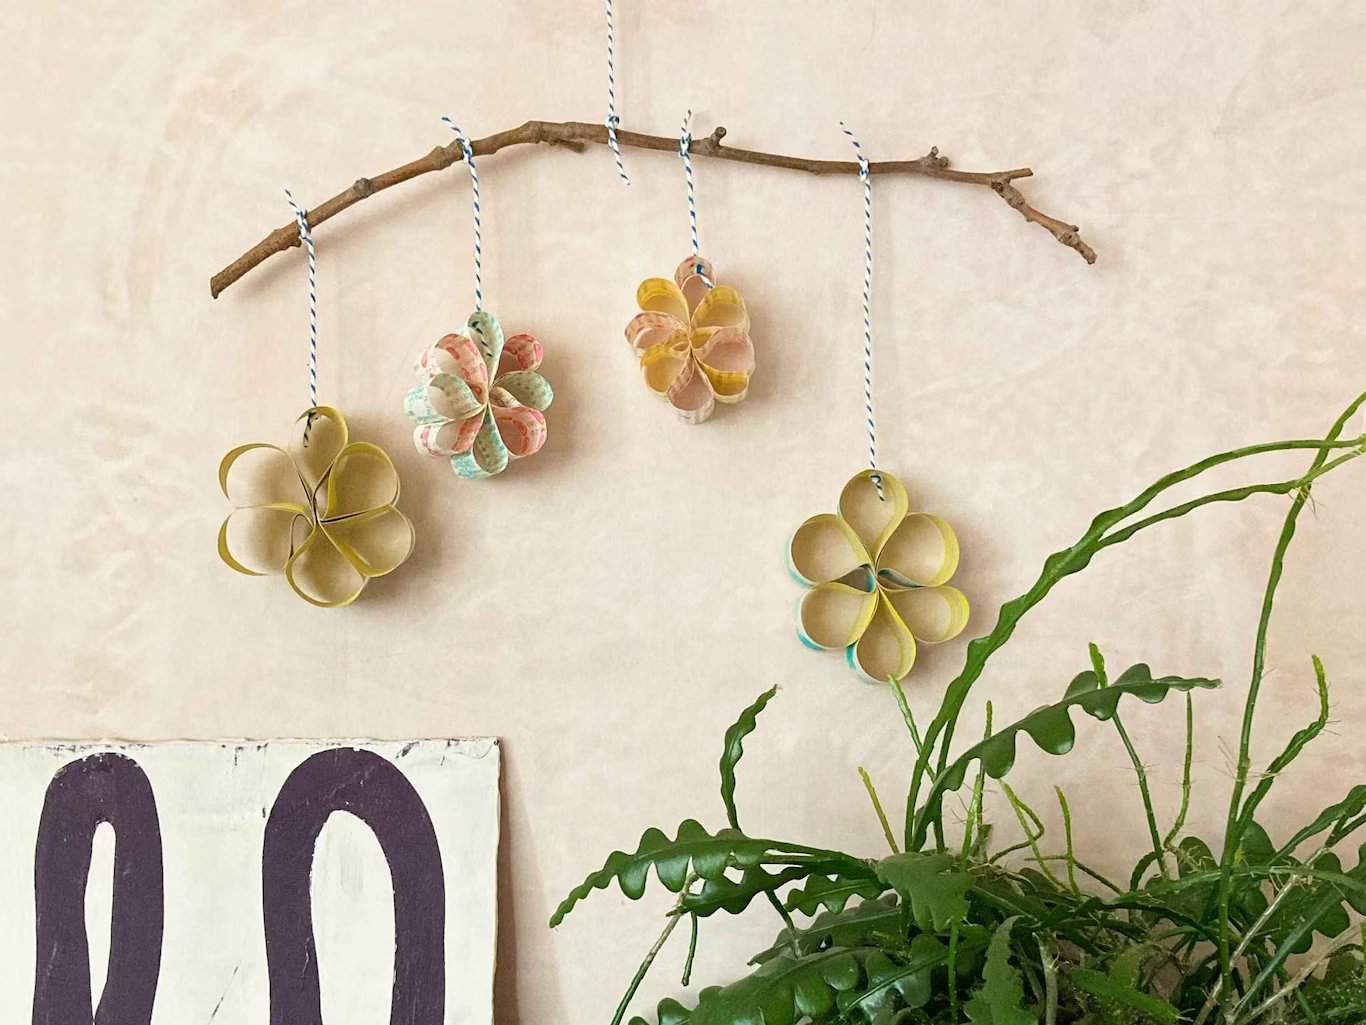 paper bauble decorations - Image by Pebble Magazine